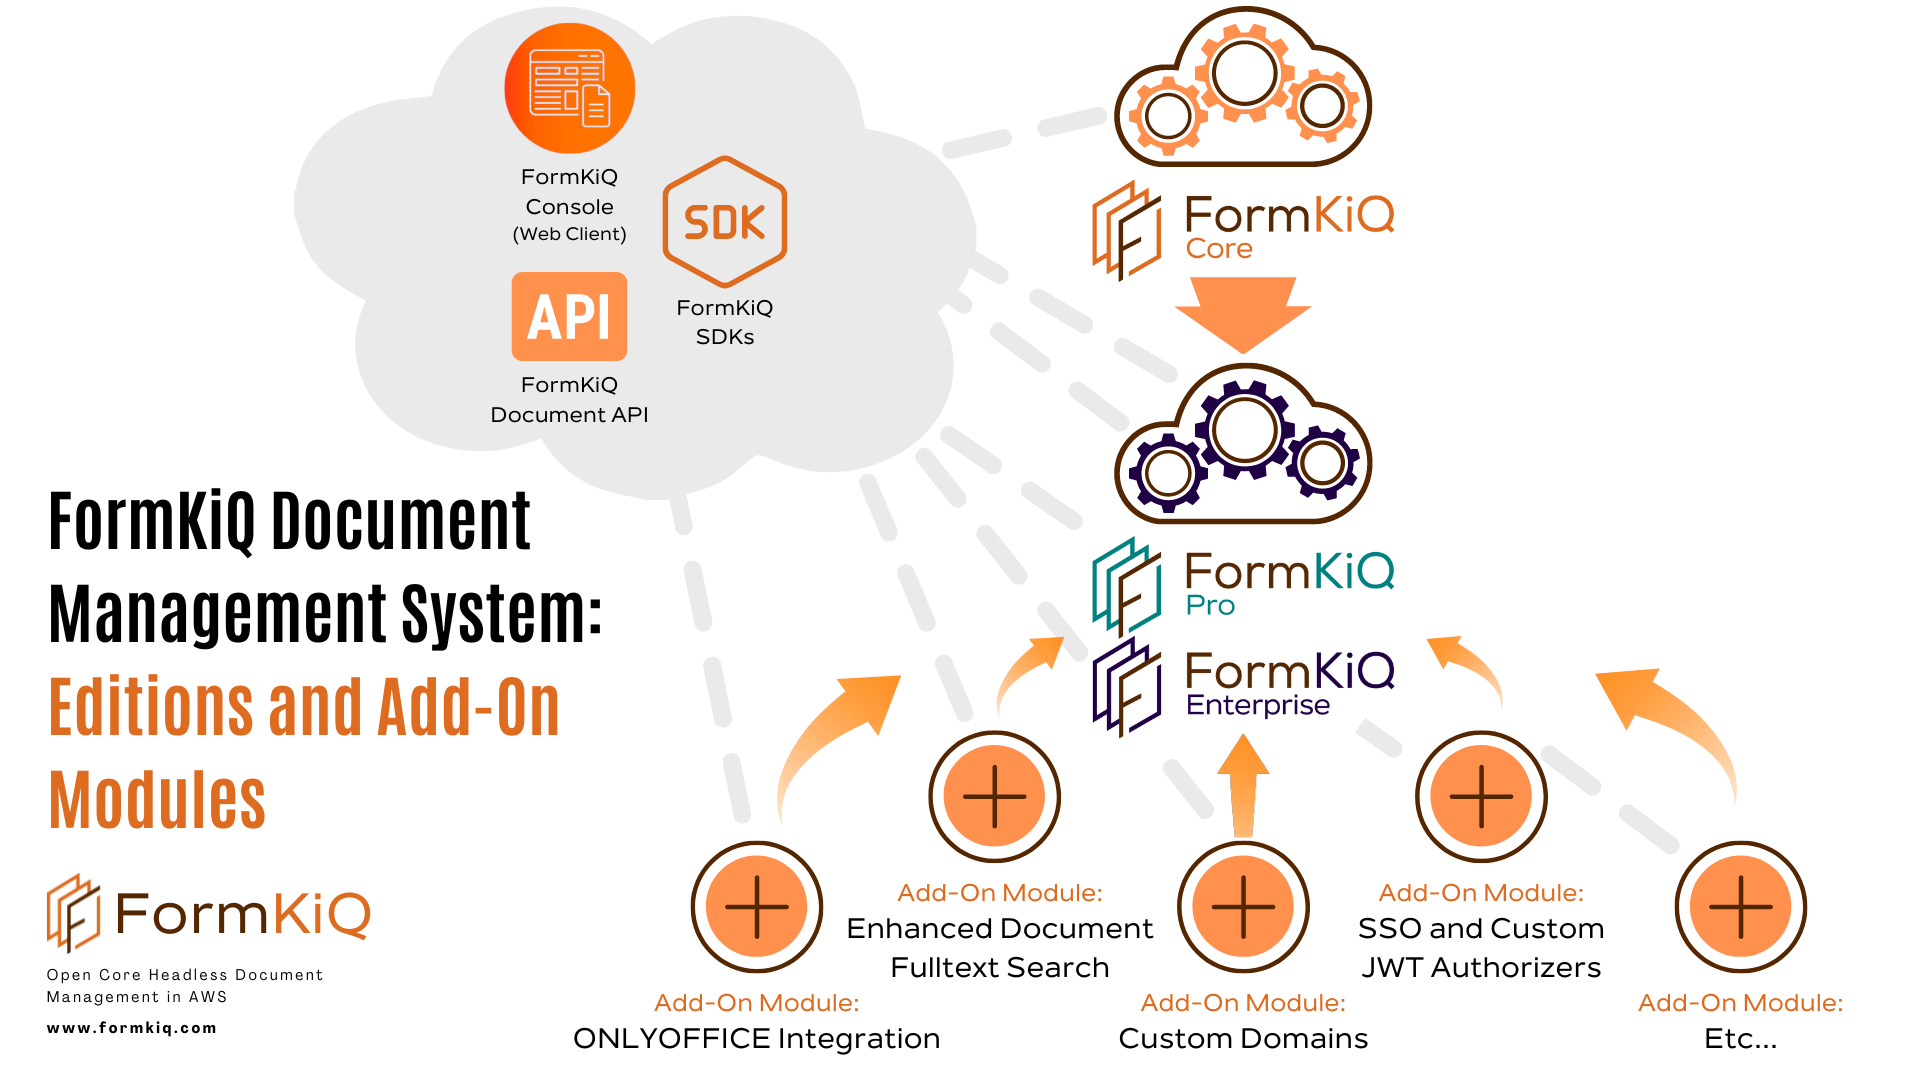 FormKiQ Enterprise Content Management / Document Management System: Editions and Add-On Modules